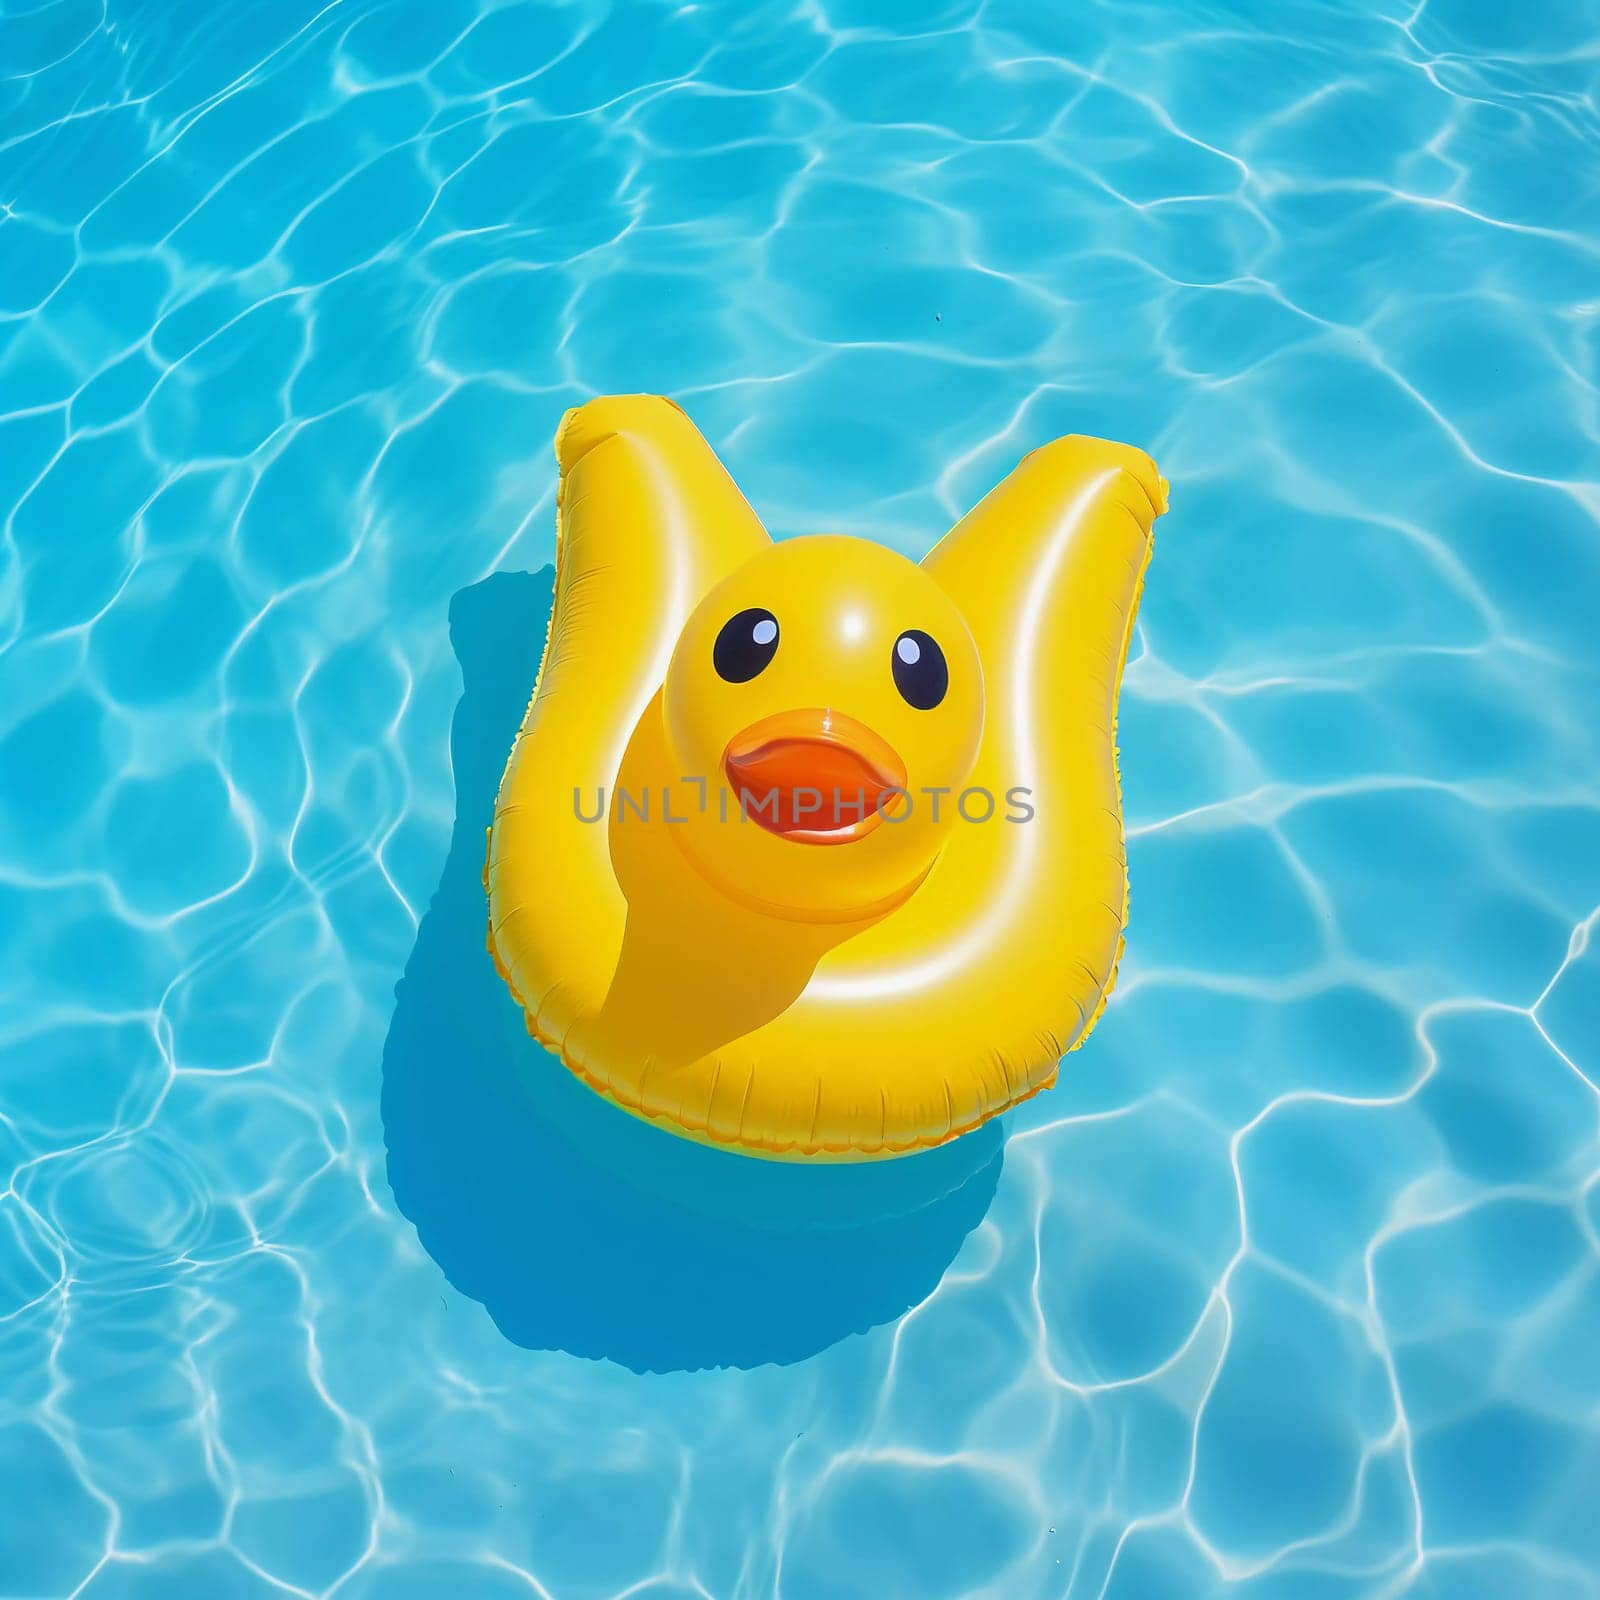 Yellow Cute Duck Air Mattress. Floats on the surface of the water in the pool. Summer colorful vacation background.